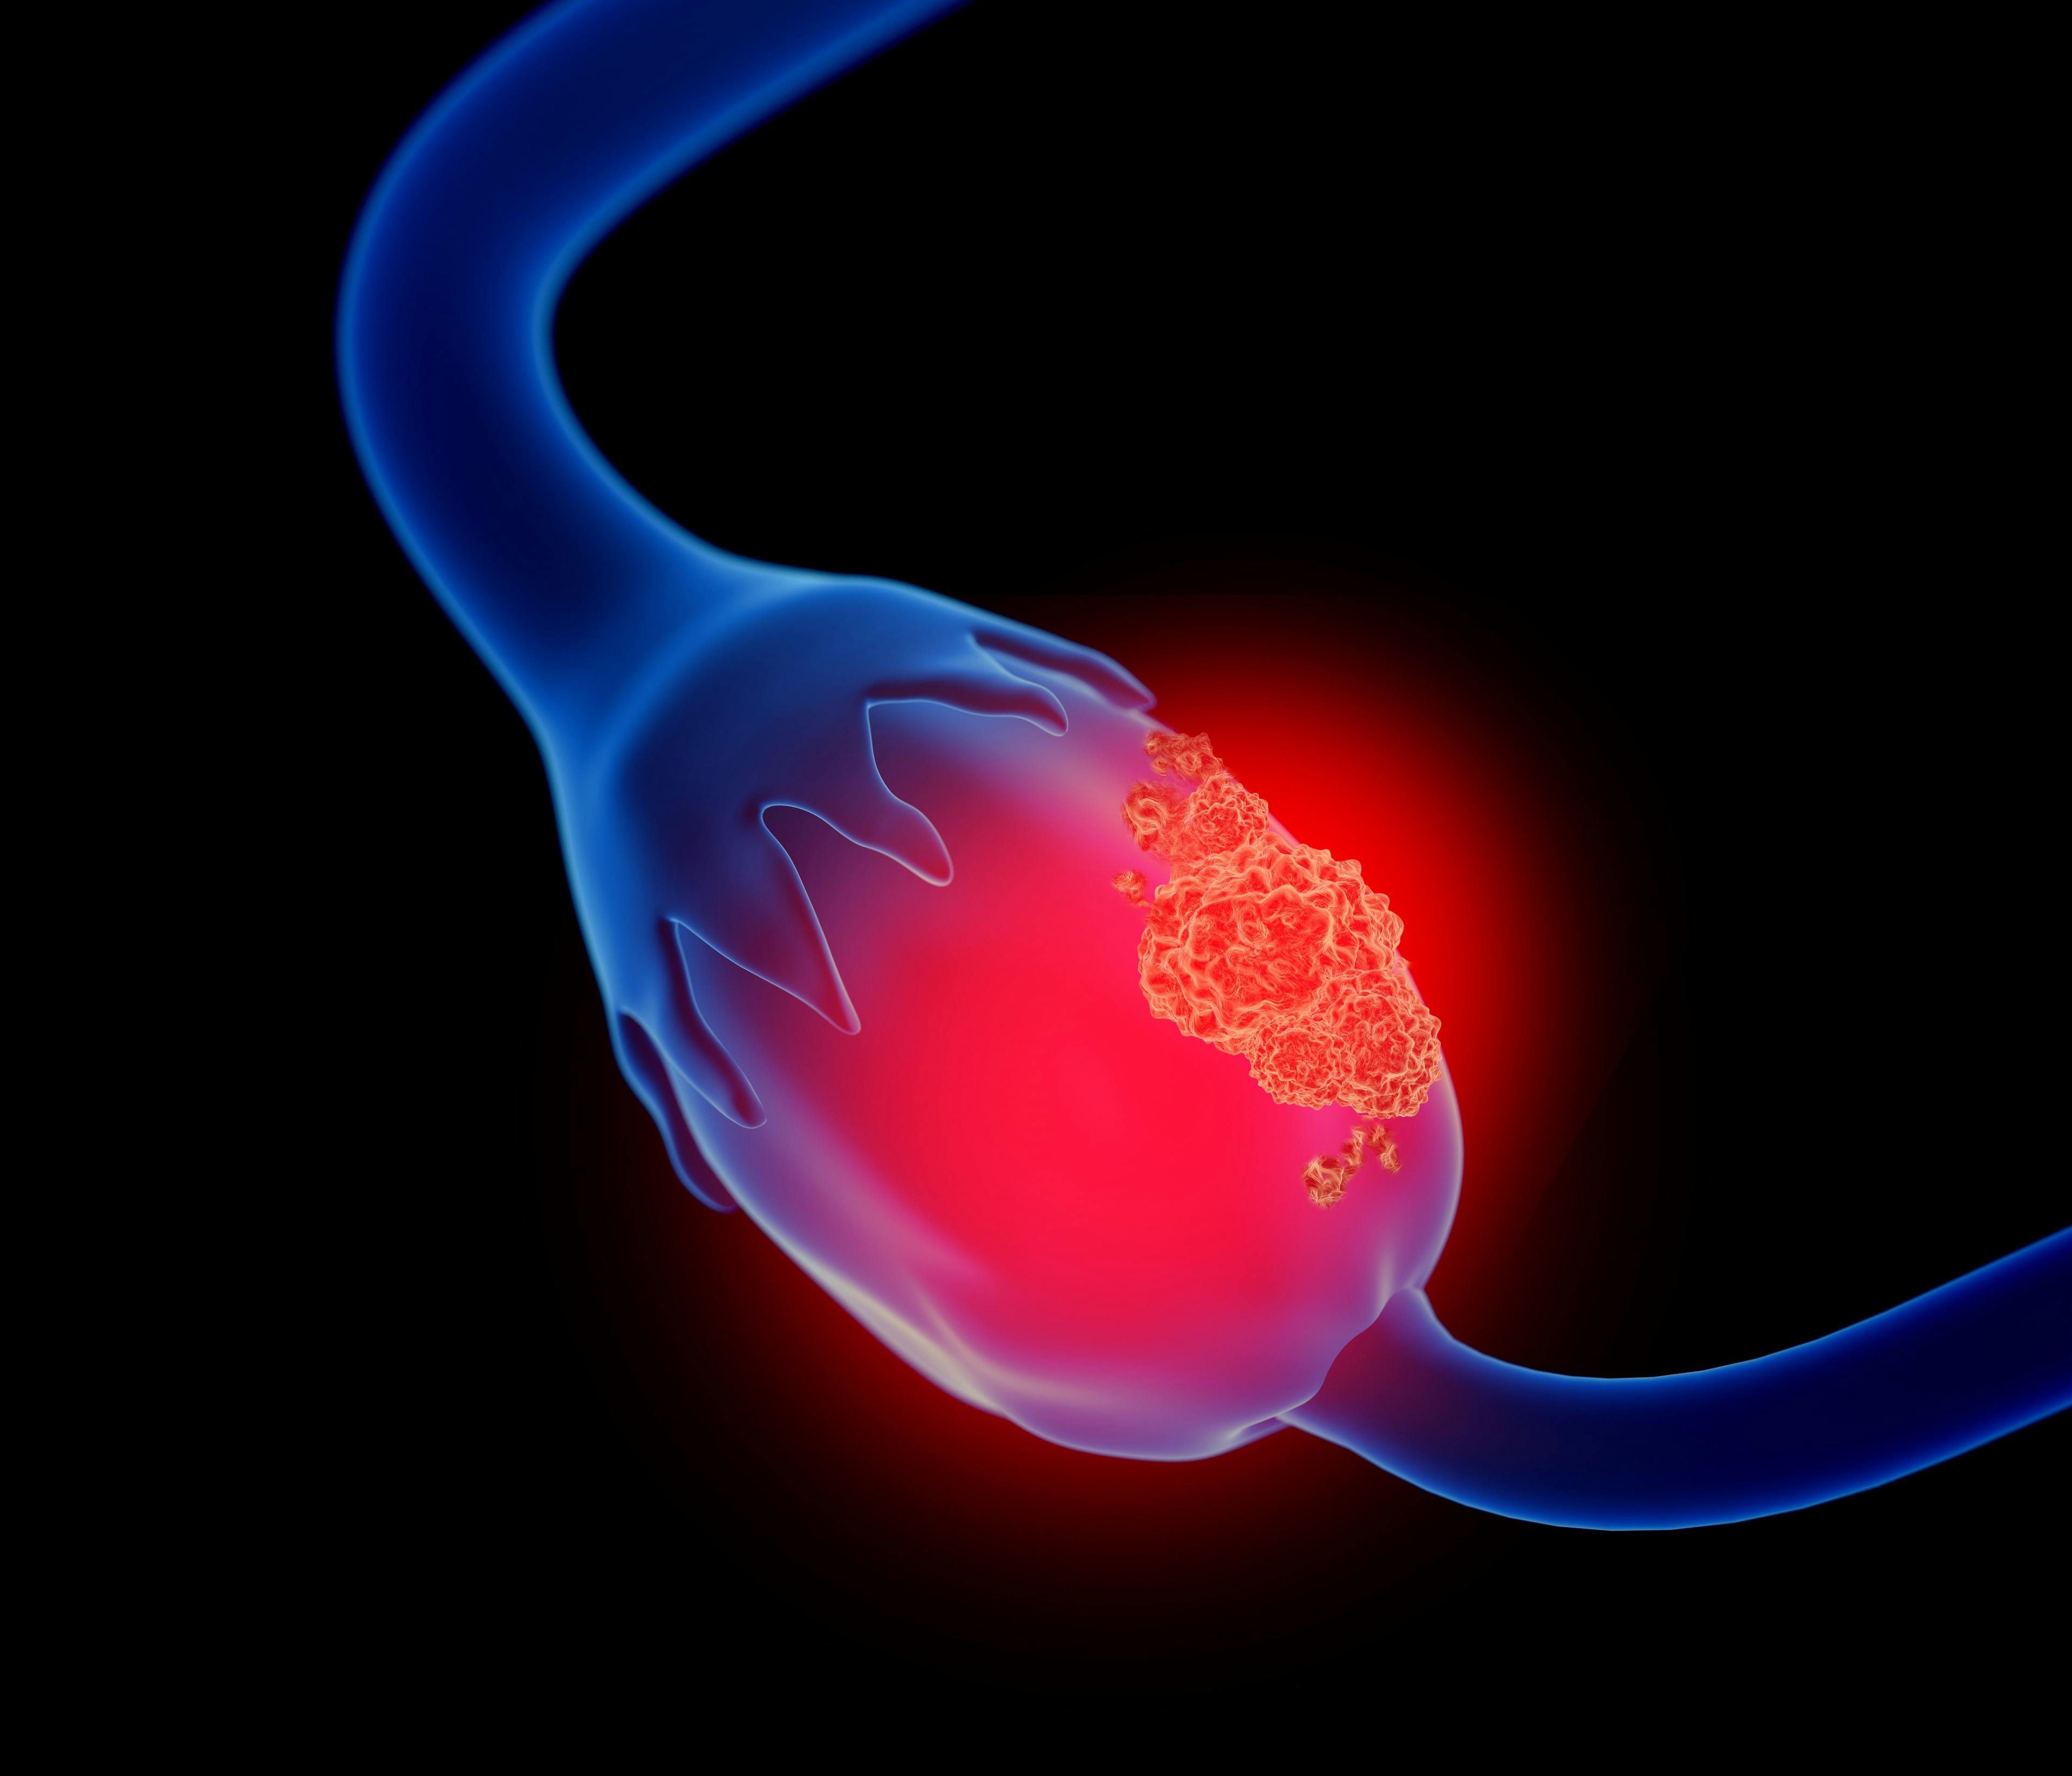 Ofra-Vec Continues to Show No Benefit in Platinum-Resistant Ovarian Cancer